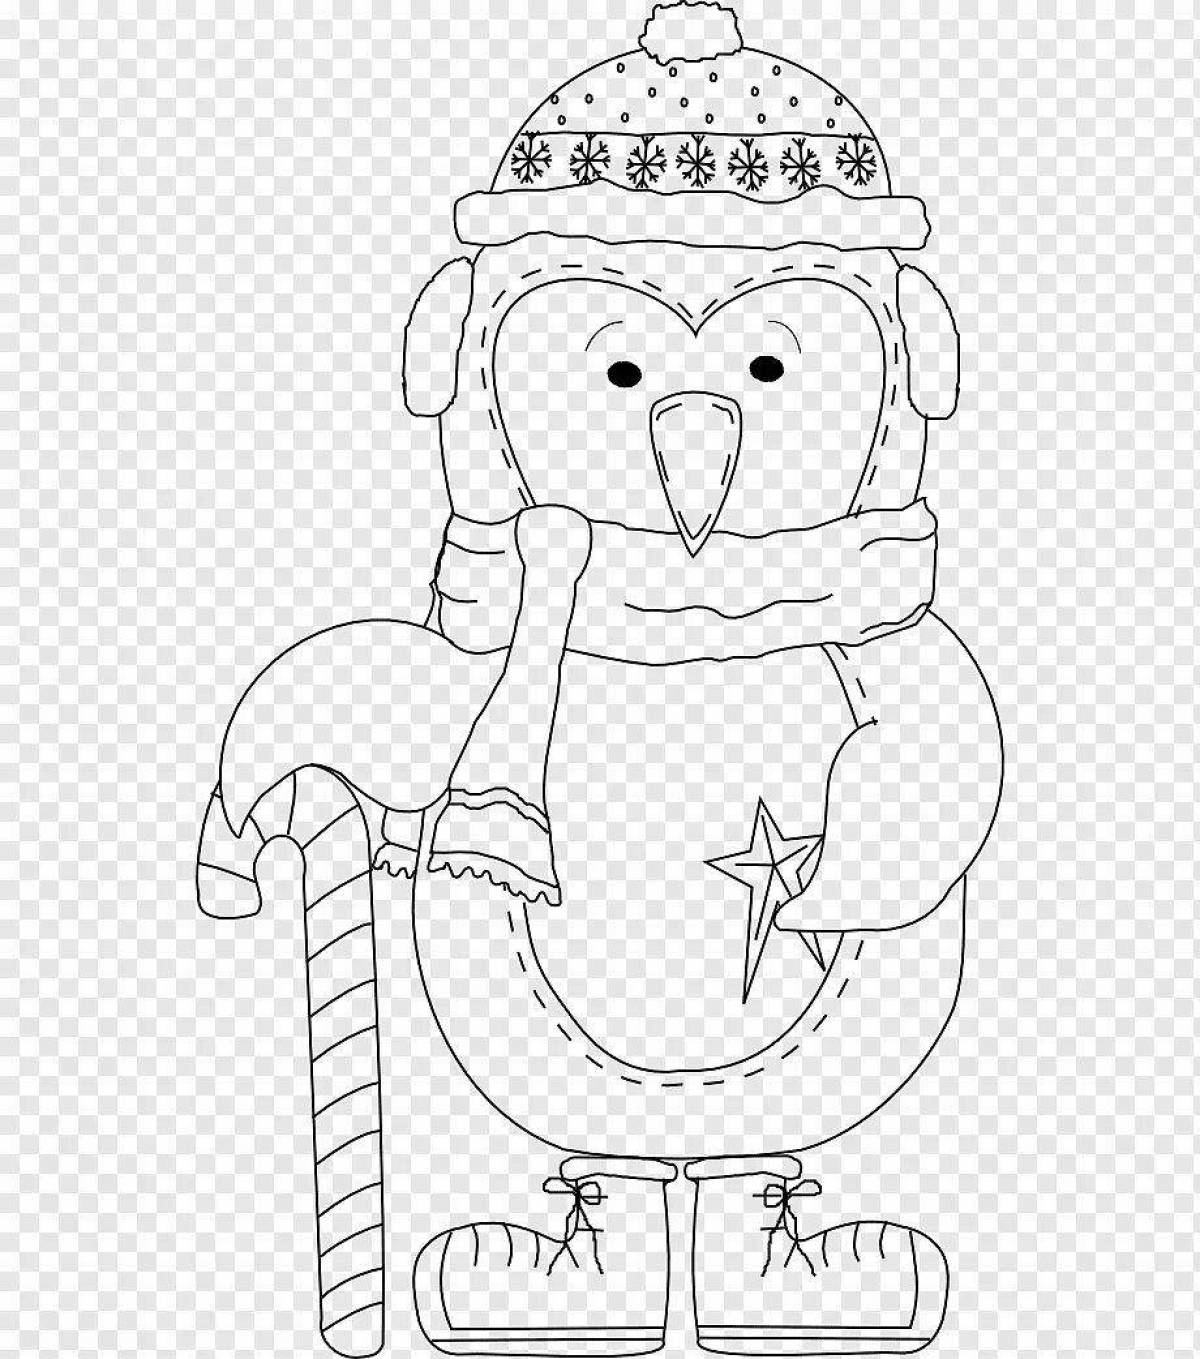 Fabulous Christmas penguin coloring page